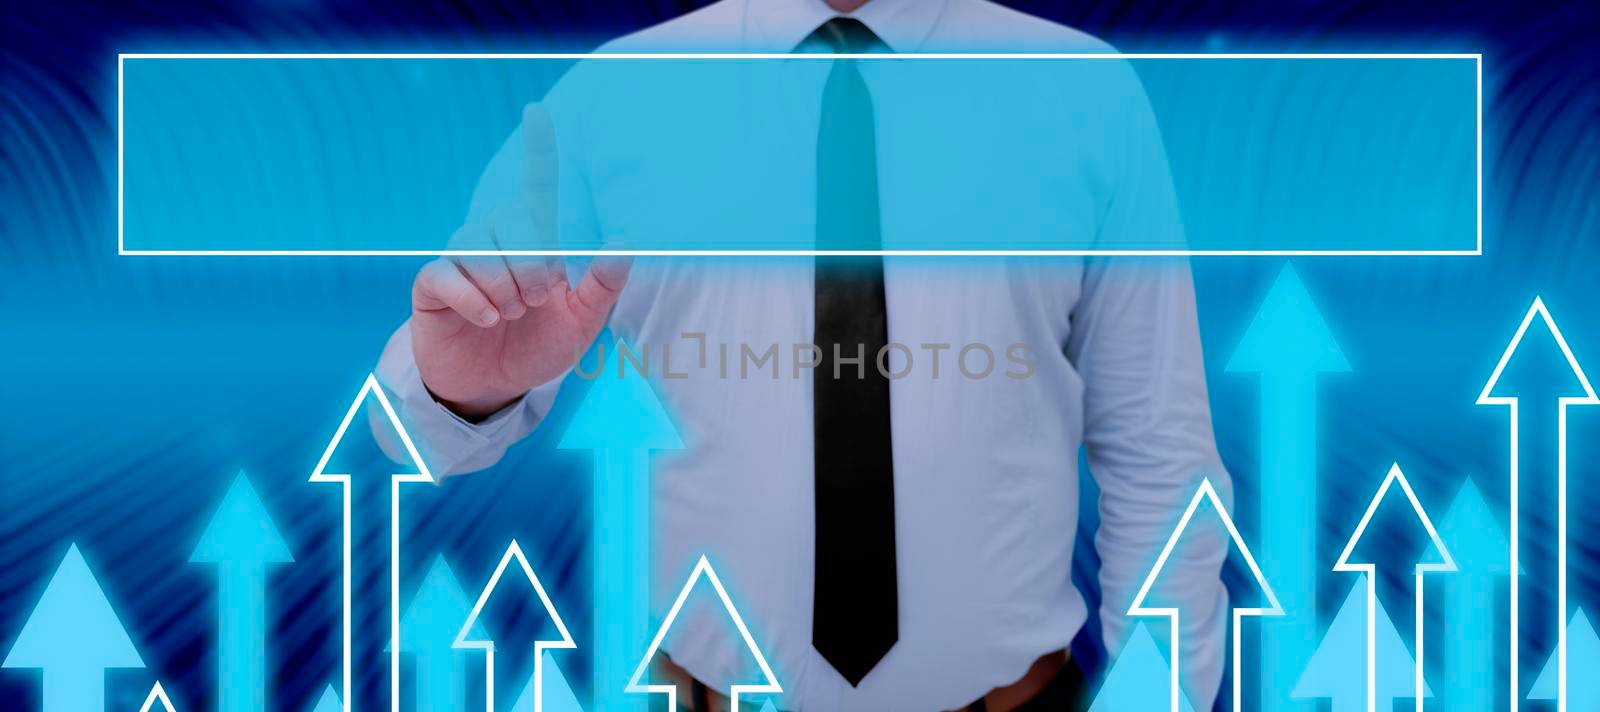 Businessman Pointing On Frame With Multiple Arrows Going Up In An Abstract Design. Standing Man In A Necktie Showing Important Data And Messages In A Presentation. by nialowwa